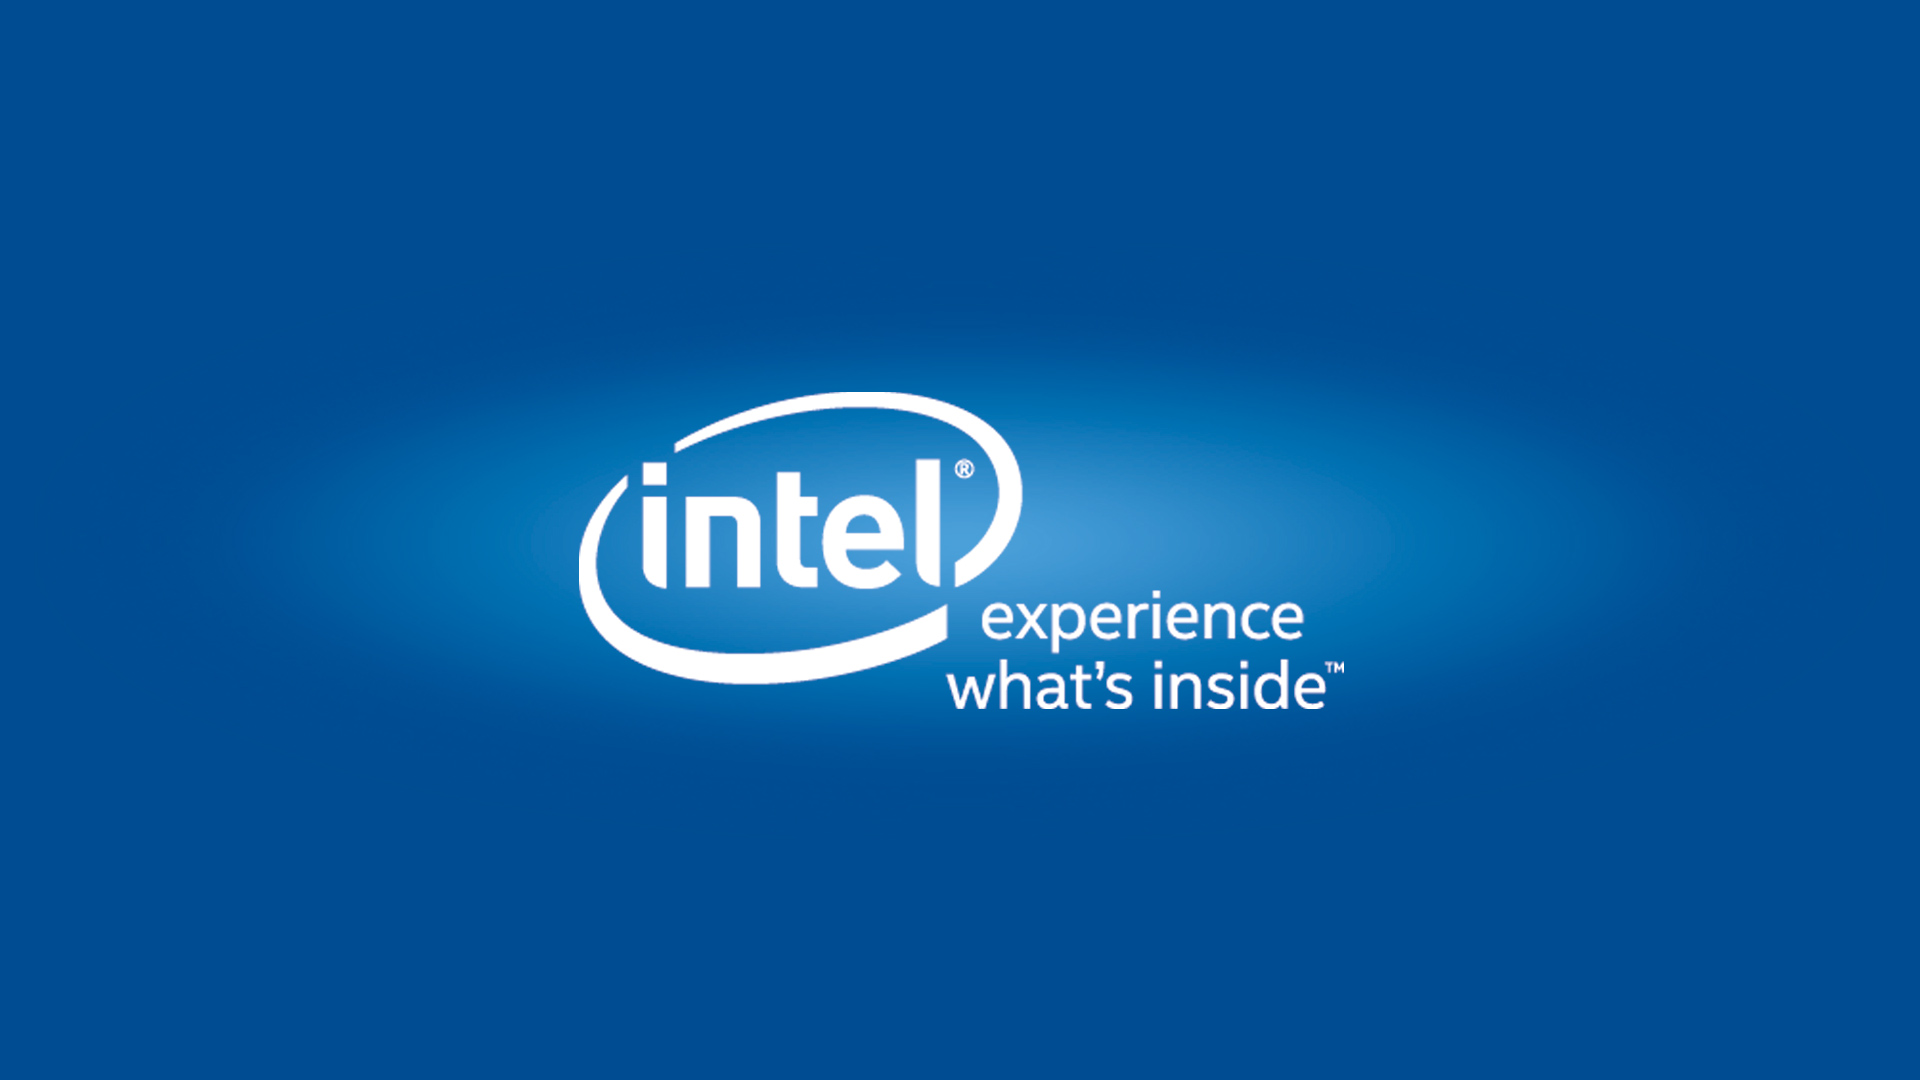 intel-experience-what-inside-1920x1080